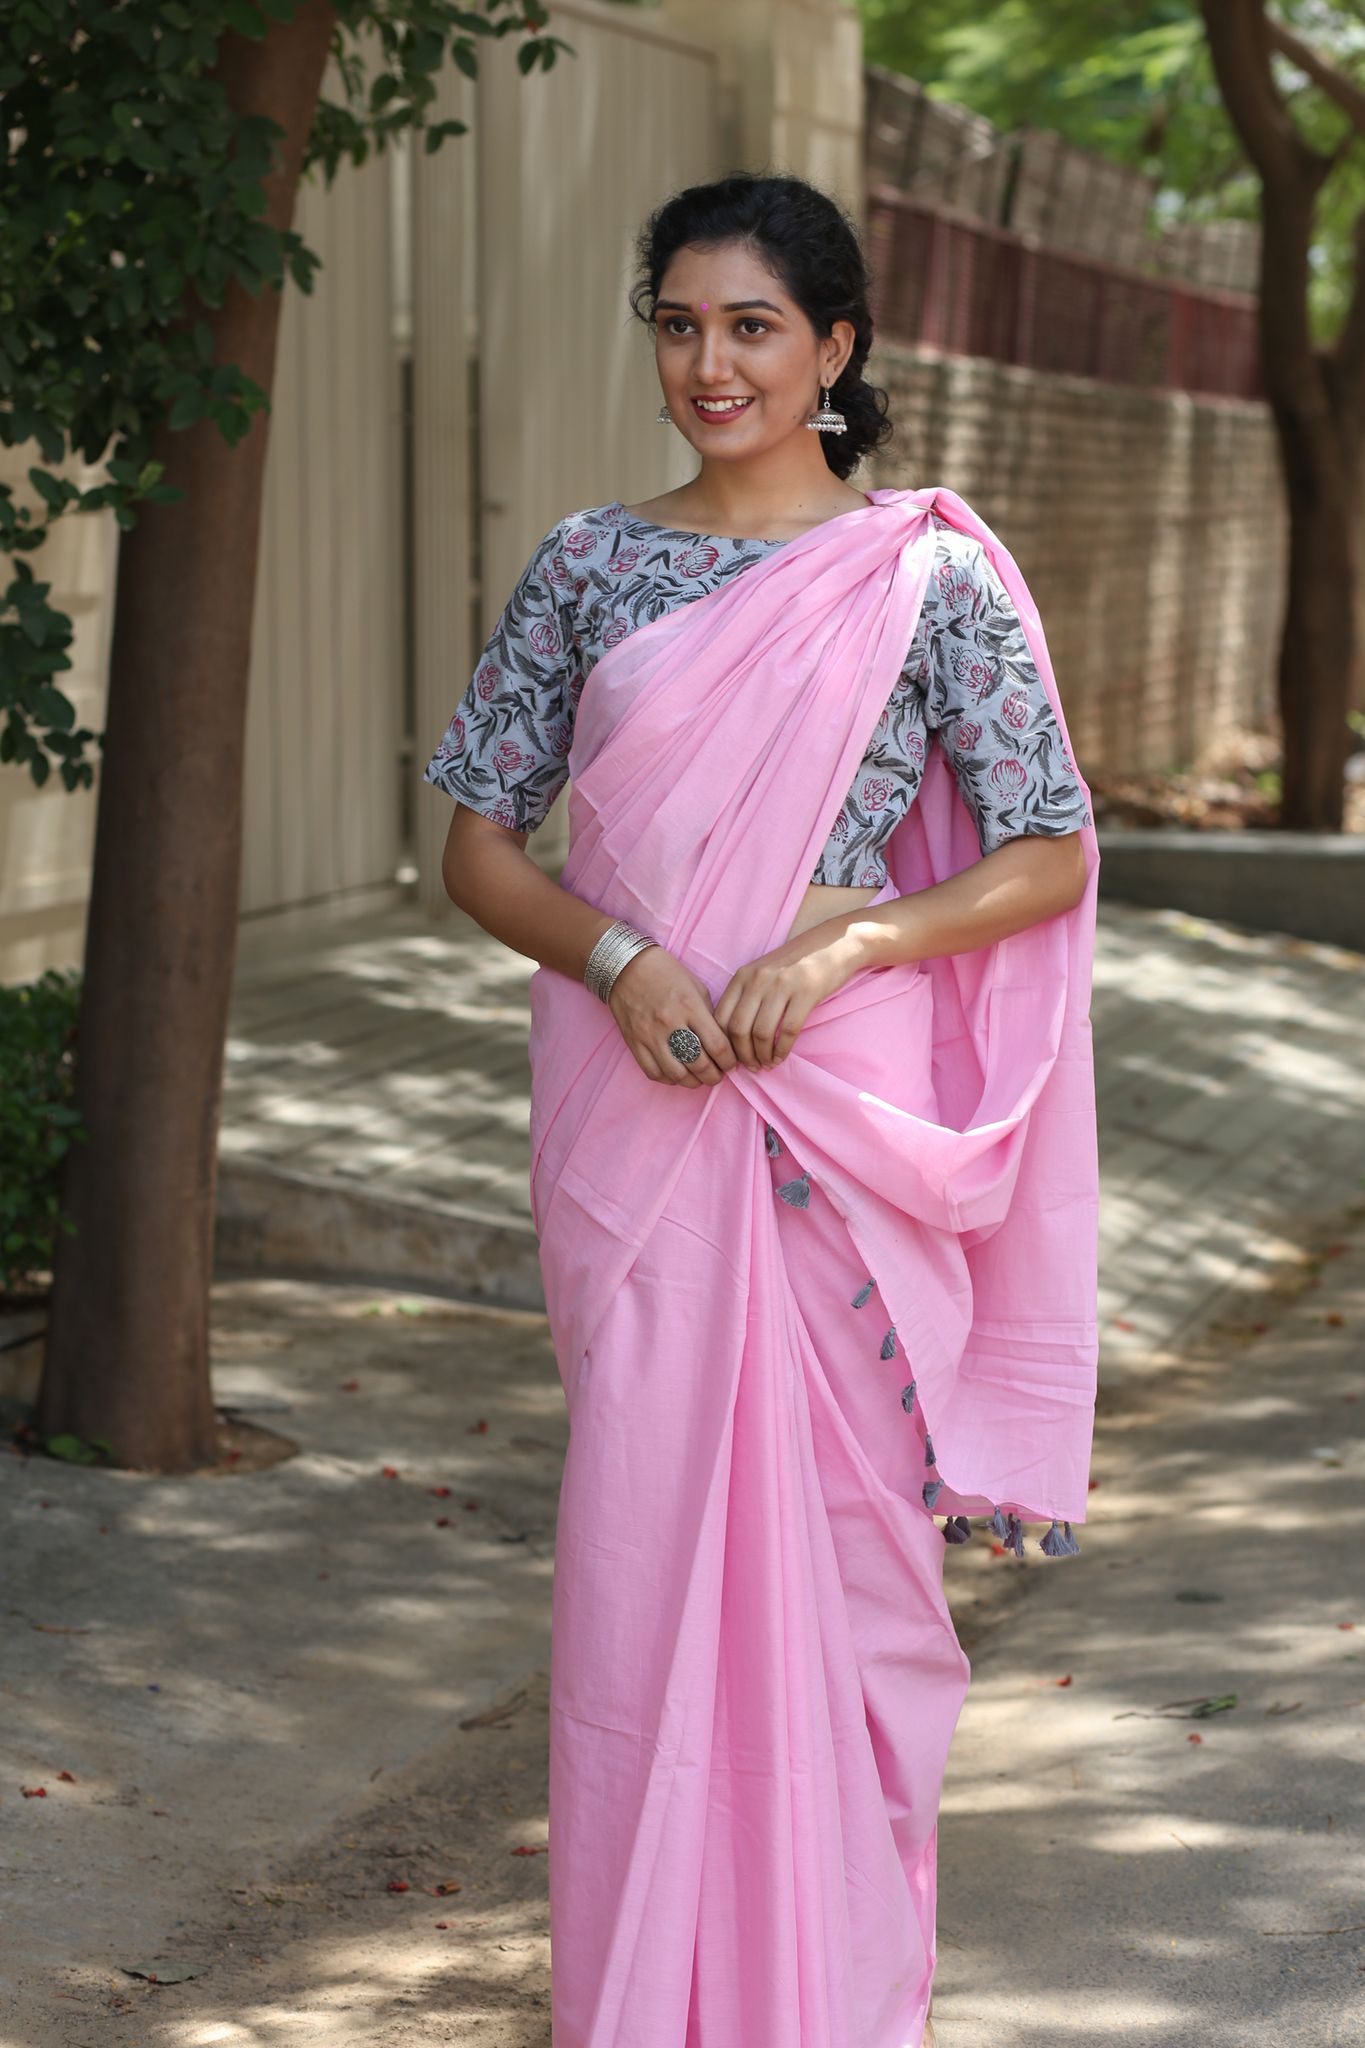 Blush Gradient - Pink Ombre Hand Dyed Mulmul Cotton Saree